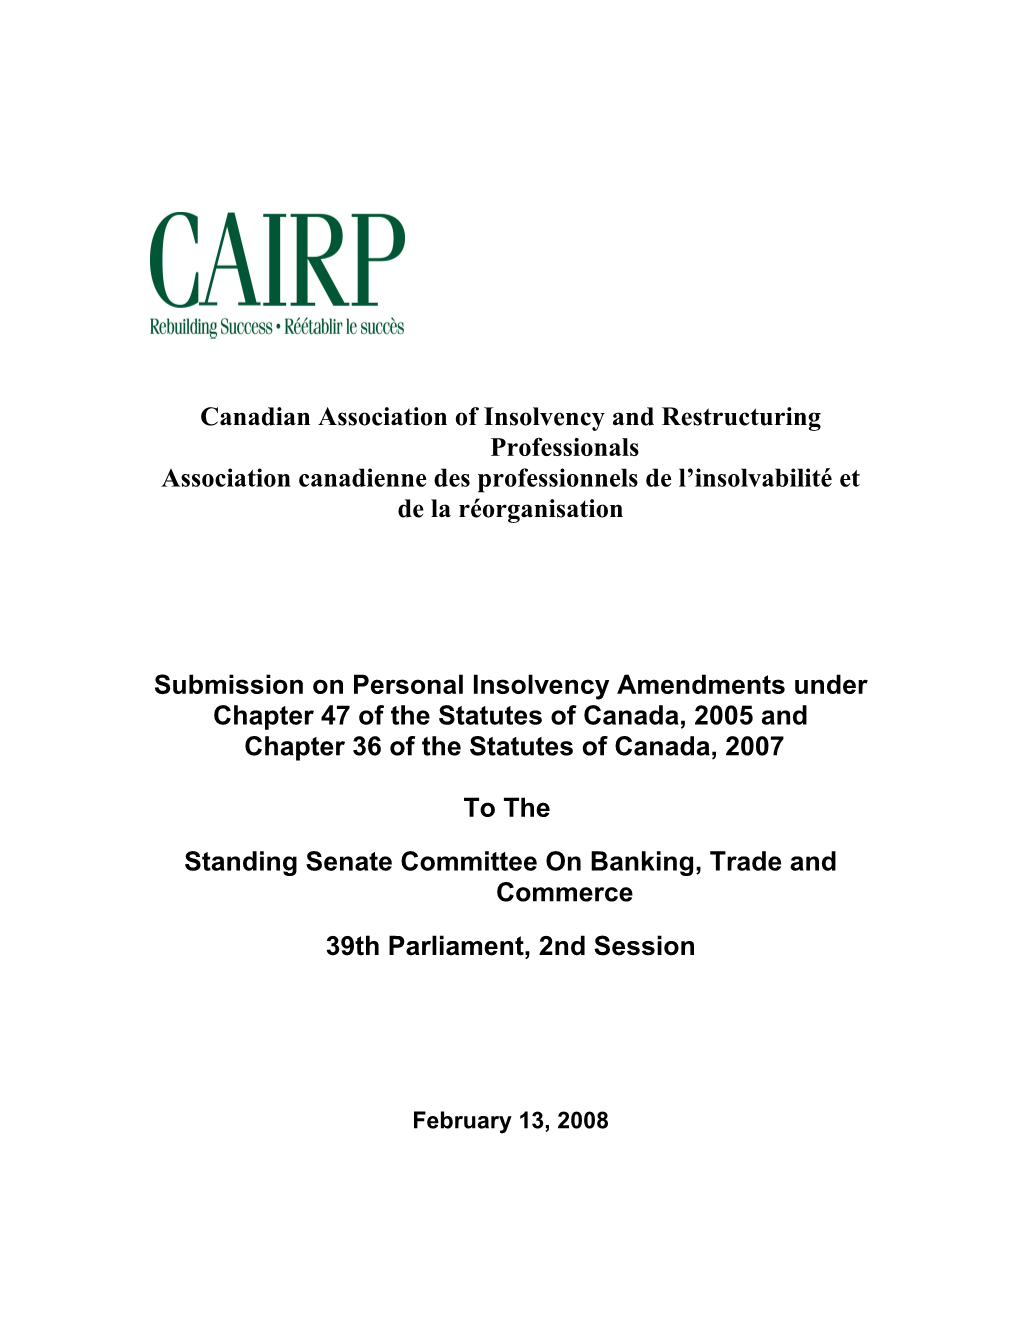 Canadian Association of Insolvency and Restructuring Professionals